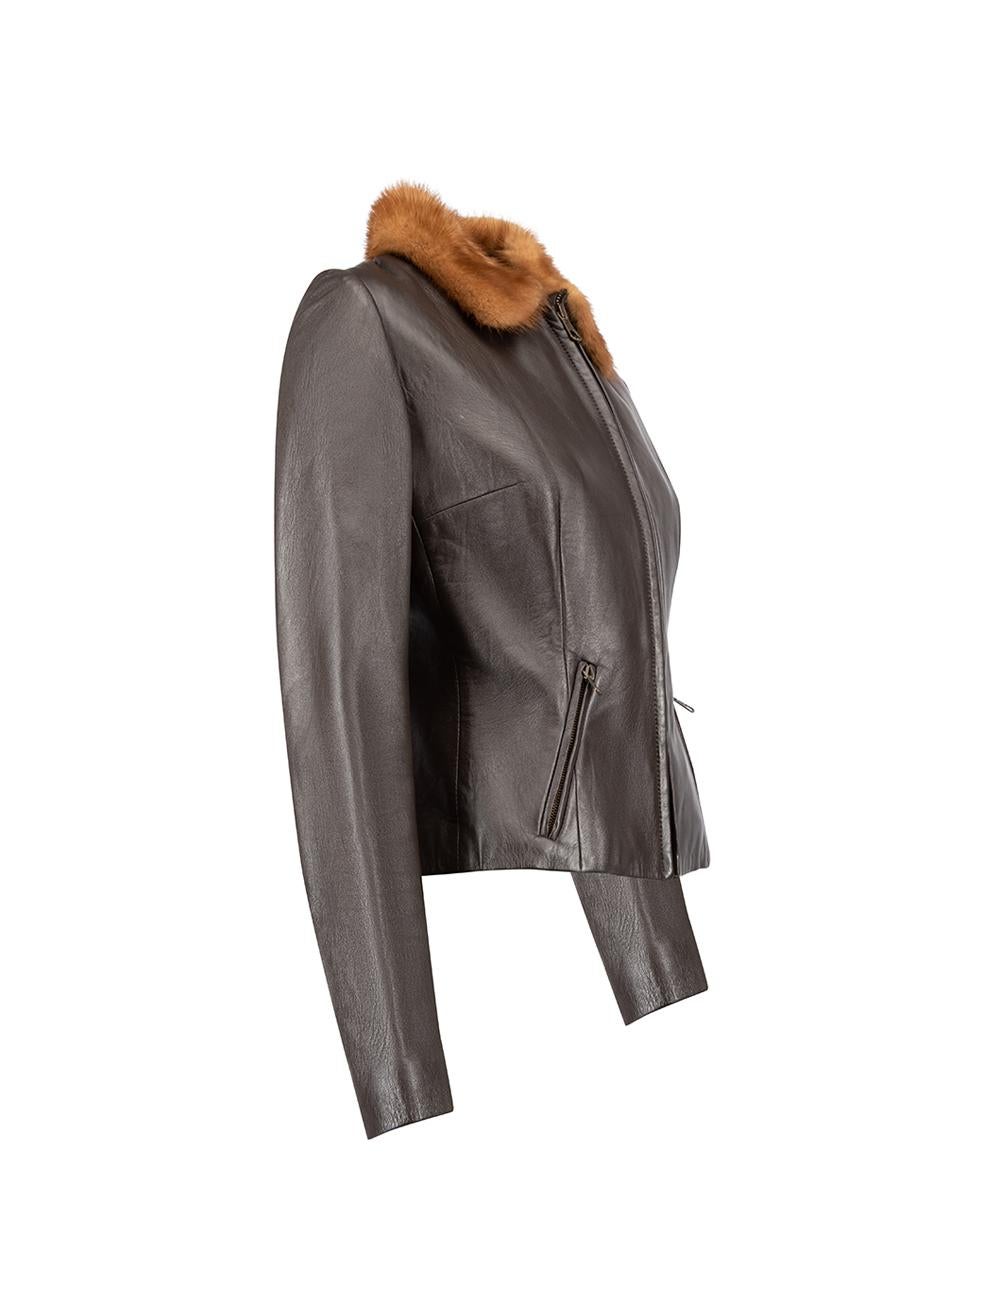 CONDITION is Very good. Minimal wear to jacket is evident. Minimal wear and creasing to the outer leather fabric on this used Dolce & Gabbana designer resale item. Details Brown Leather Track jacket Fox fur collar Front zip closure Front zipped